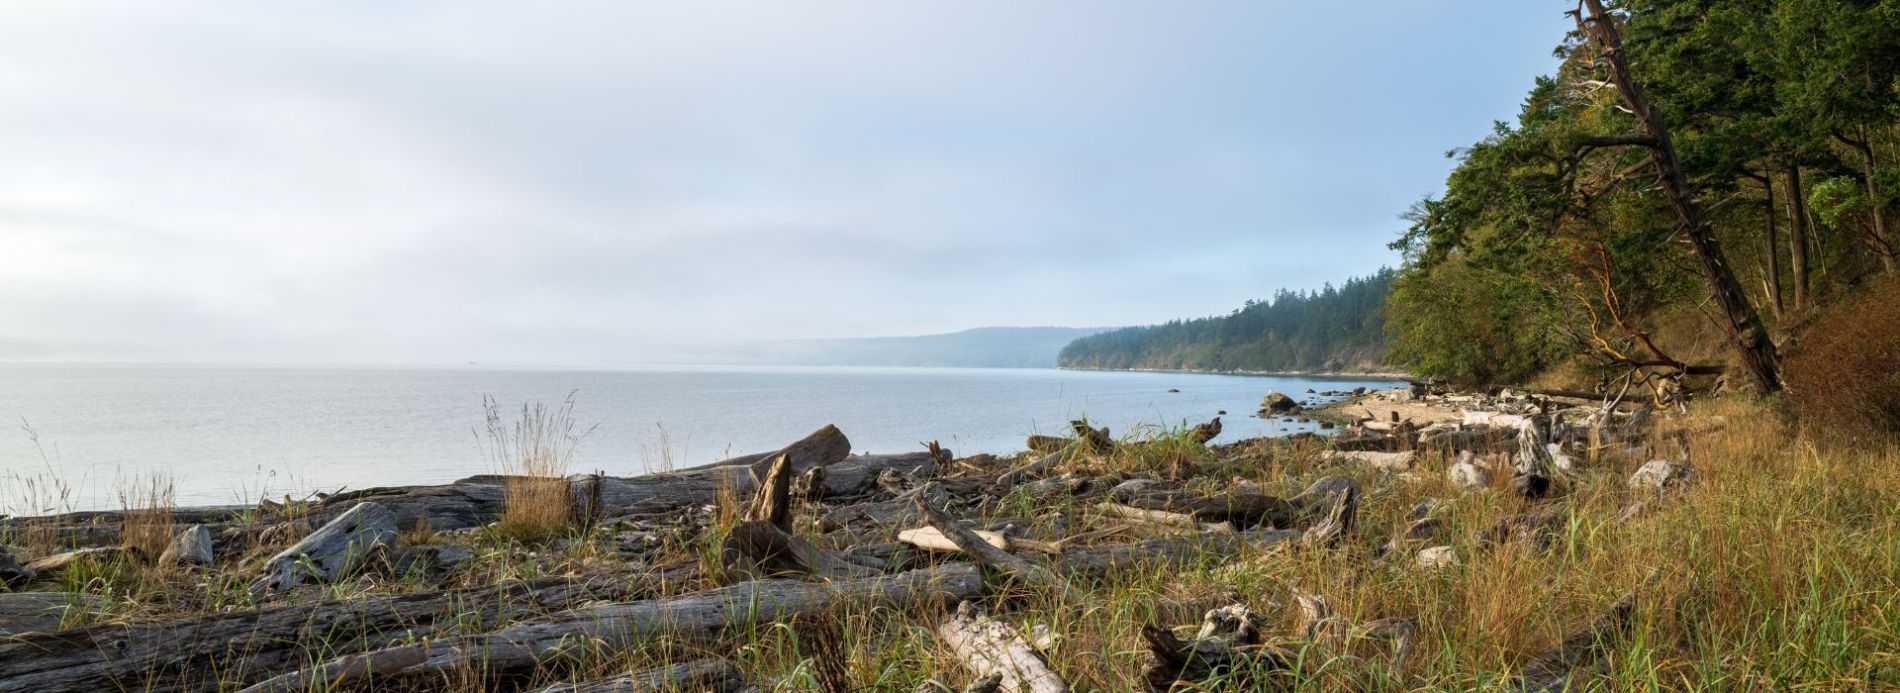 Everything You Need To Know Before Visiting Lopez Island  Feature Image